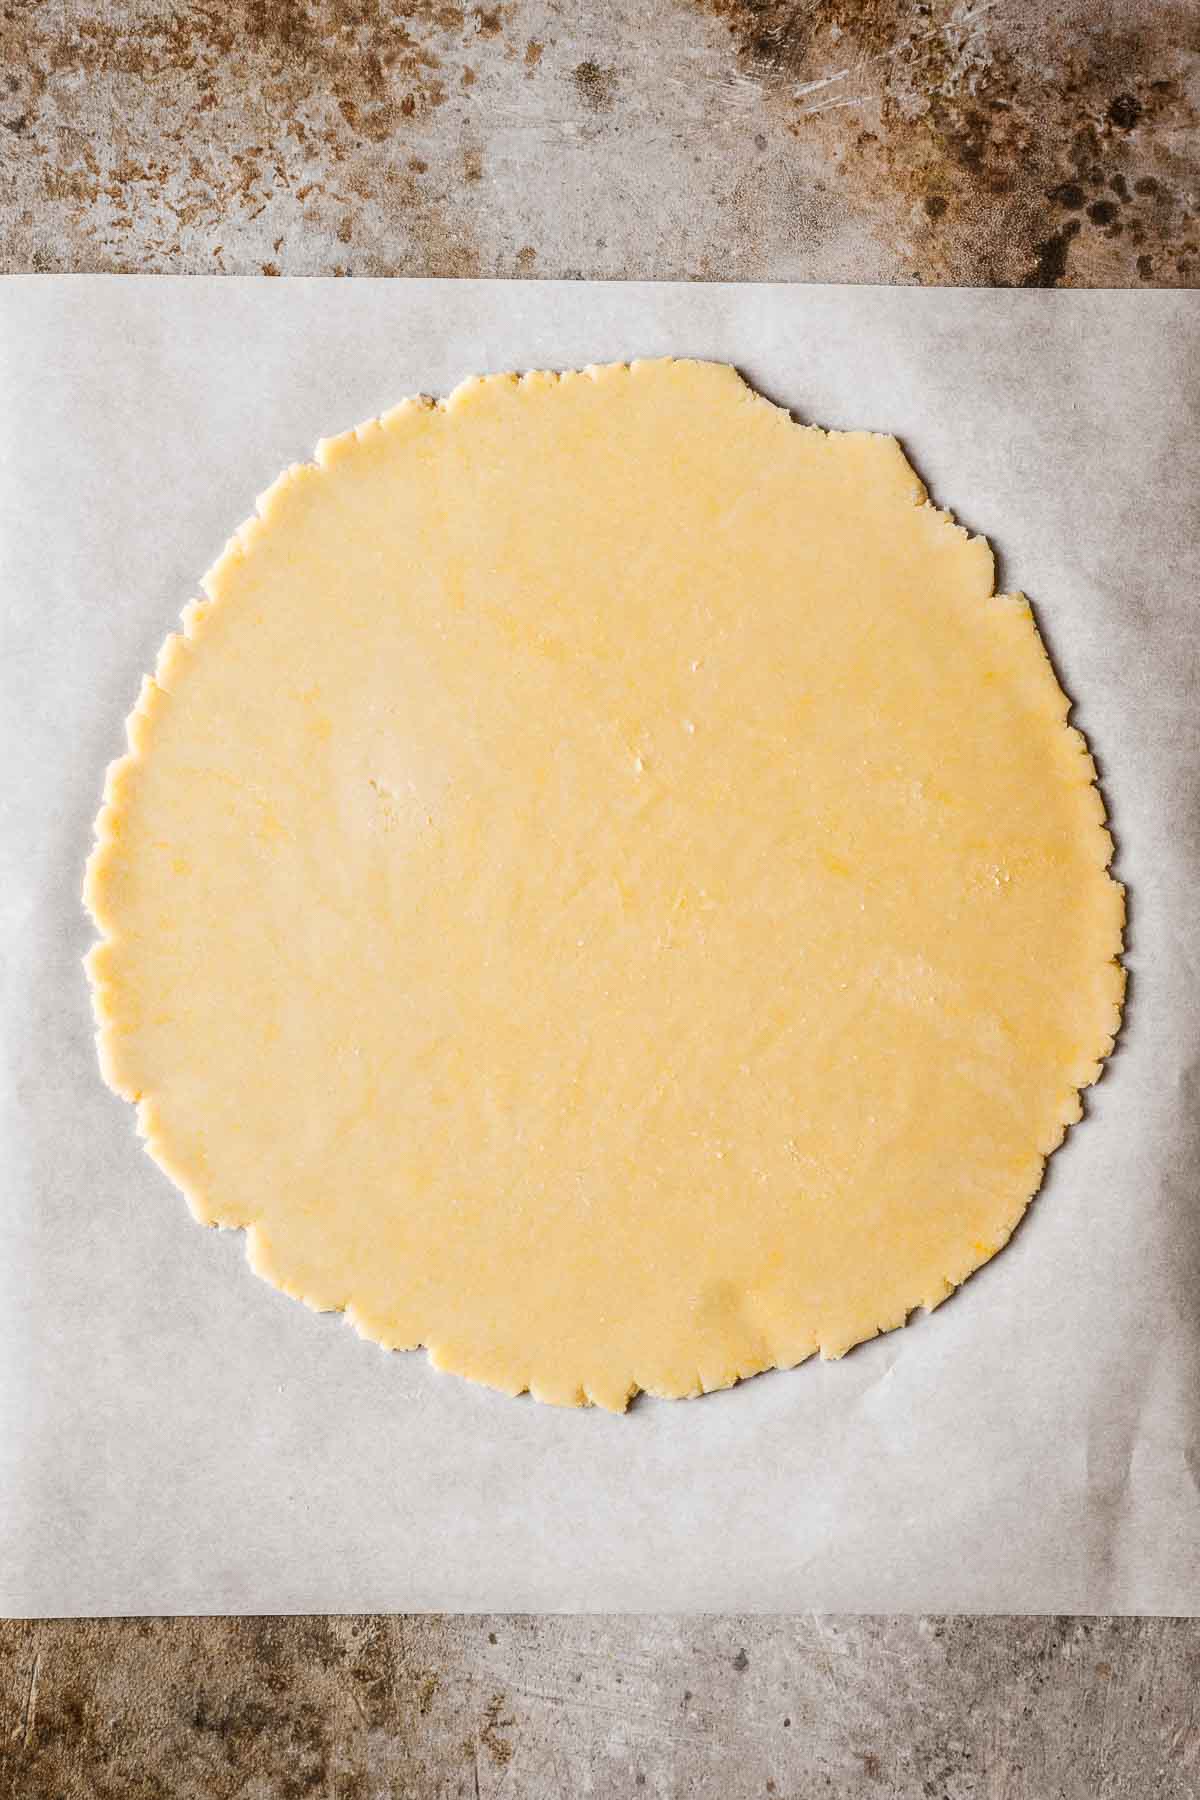 A circle of rolled out dough on parchment paper.